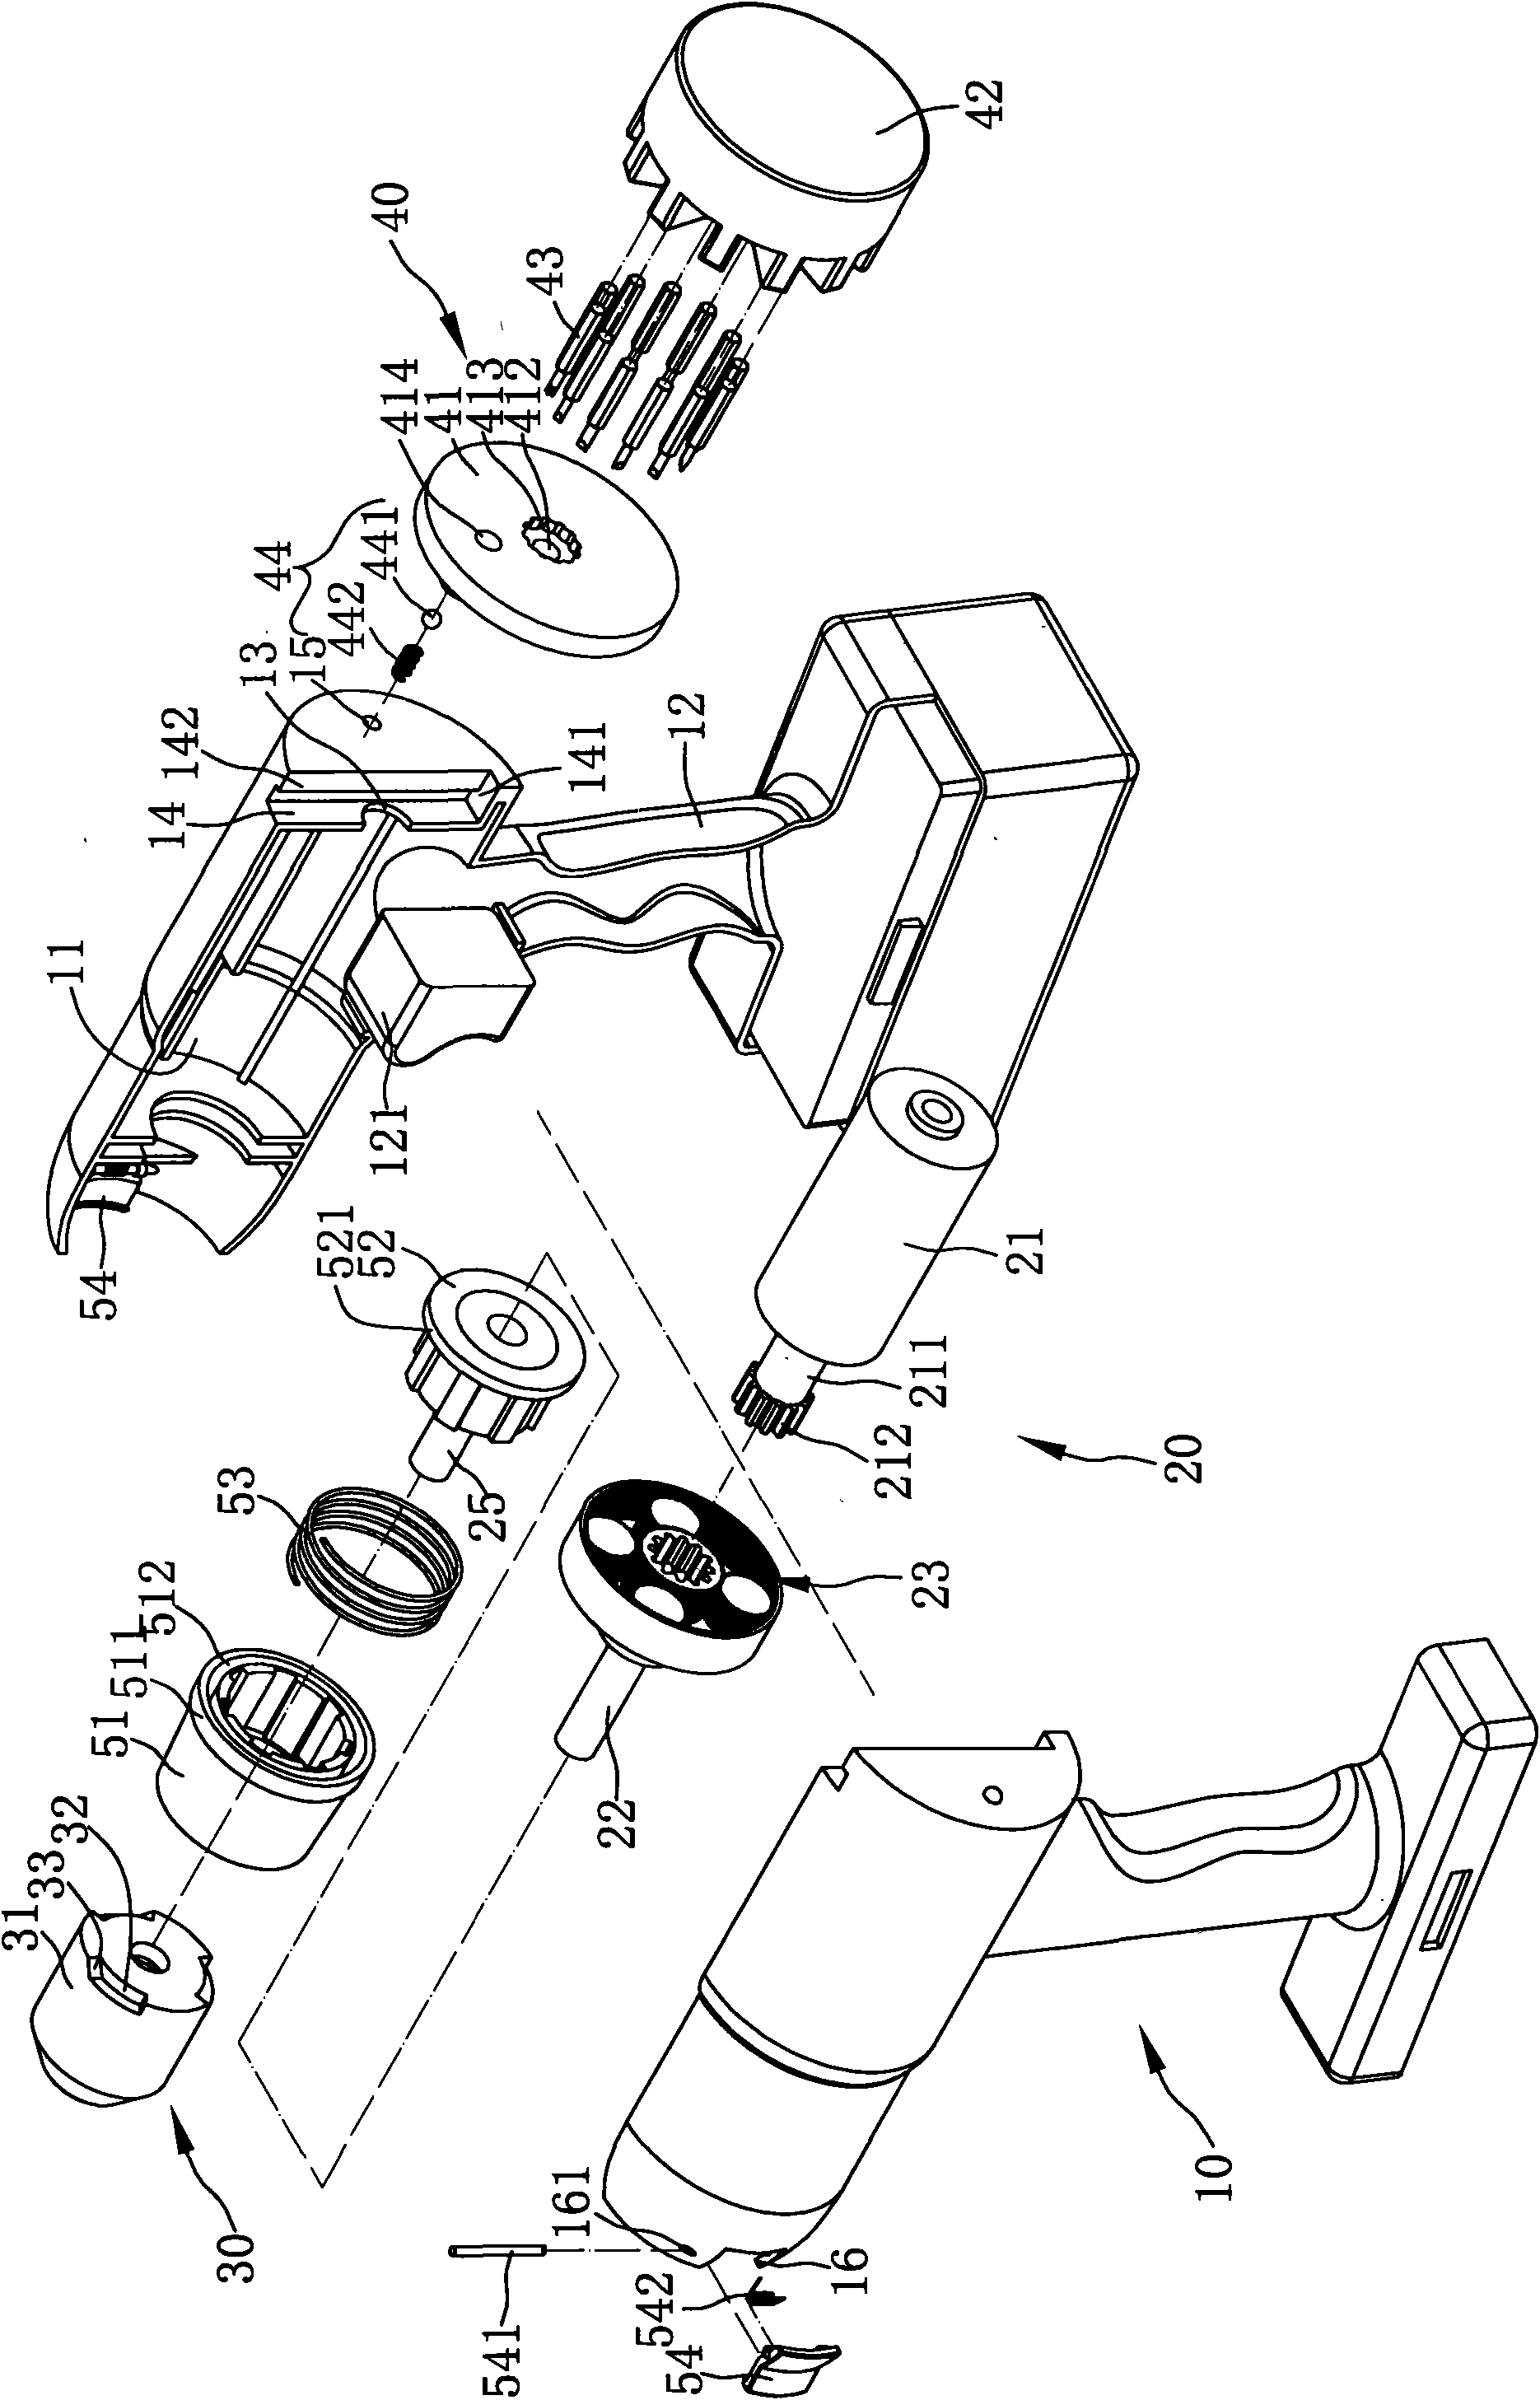 Power tool with slidable storage device